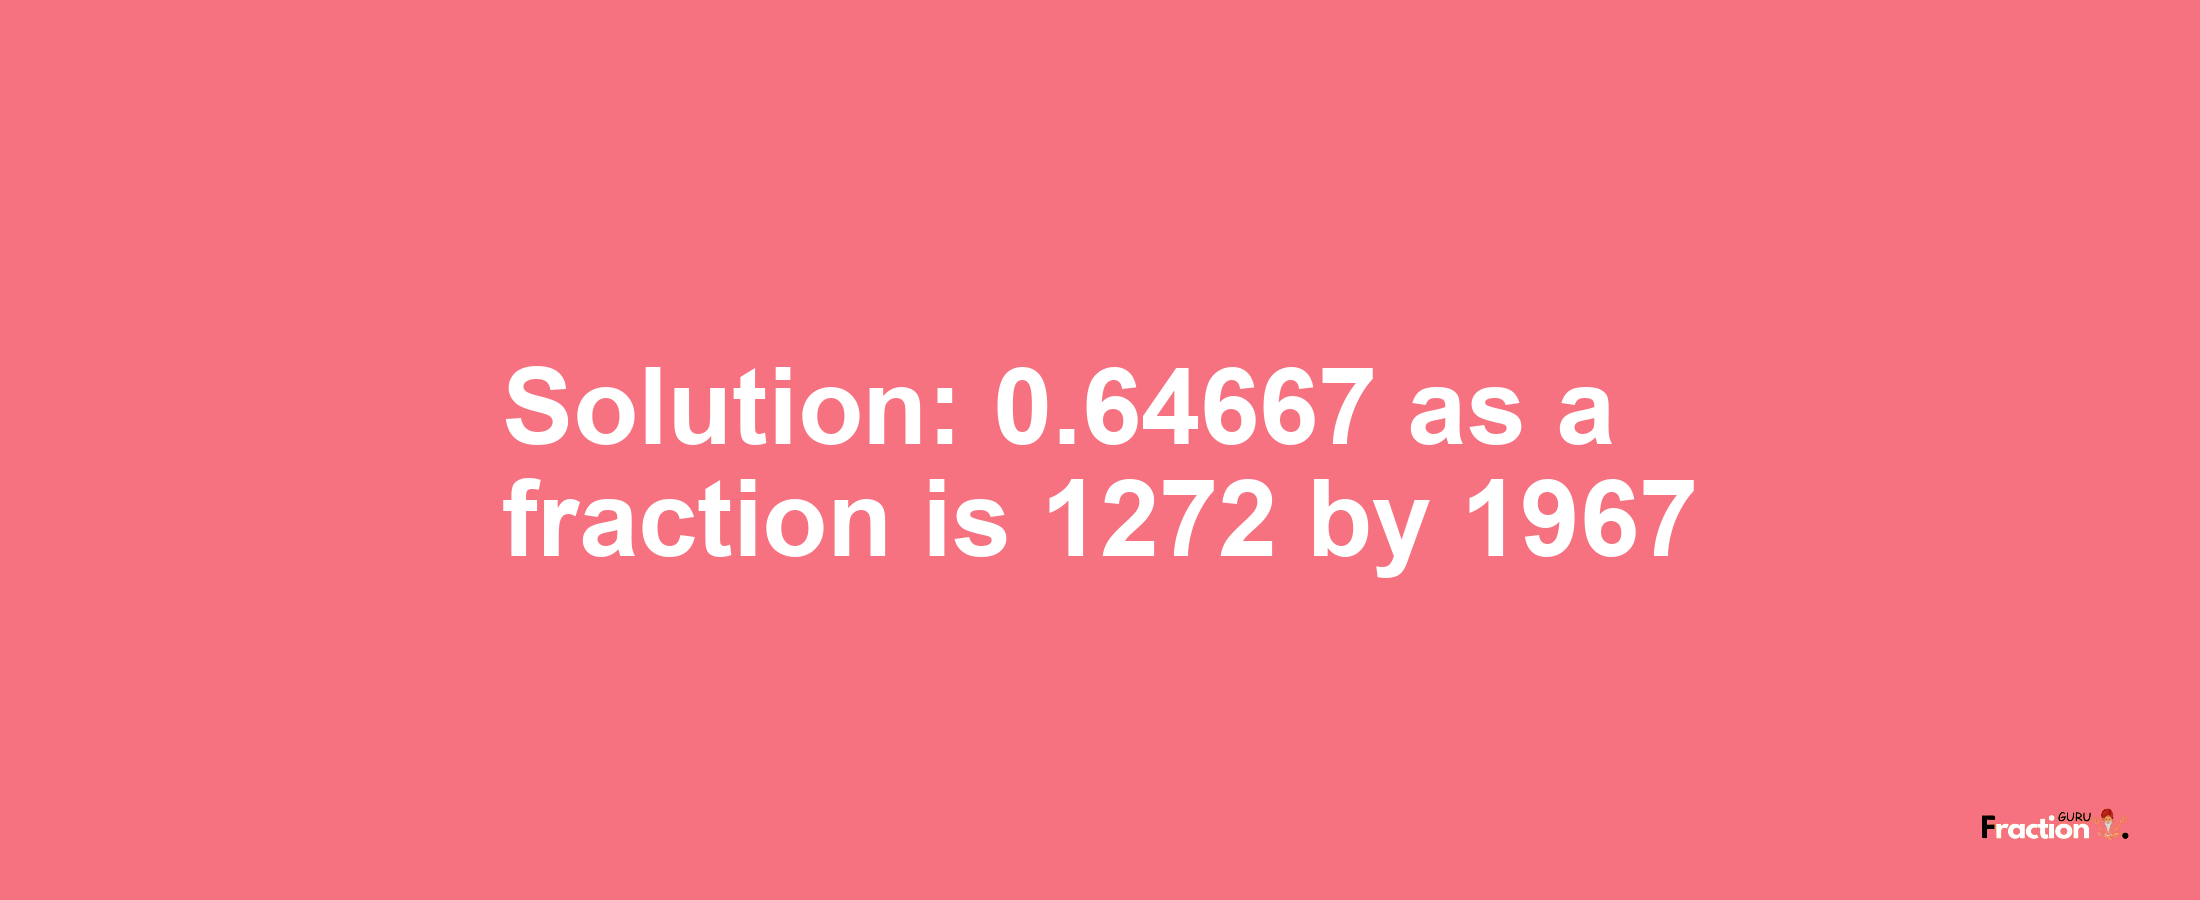 Solution:0.64667 as a fraction is 1272/1967